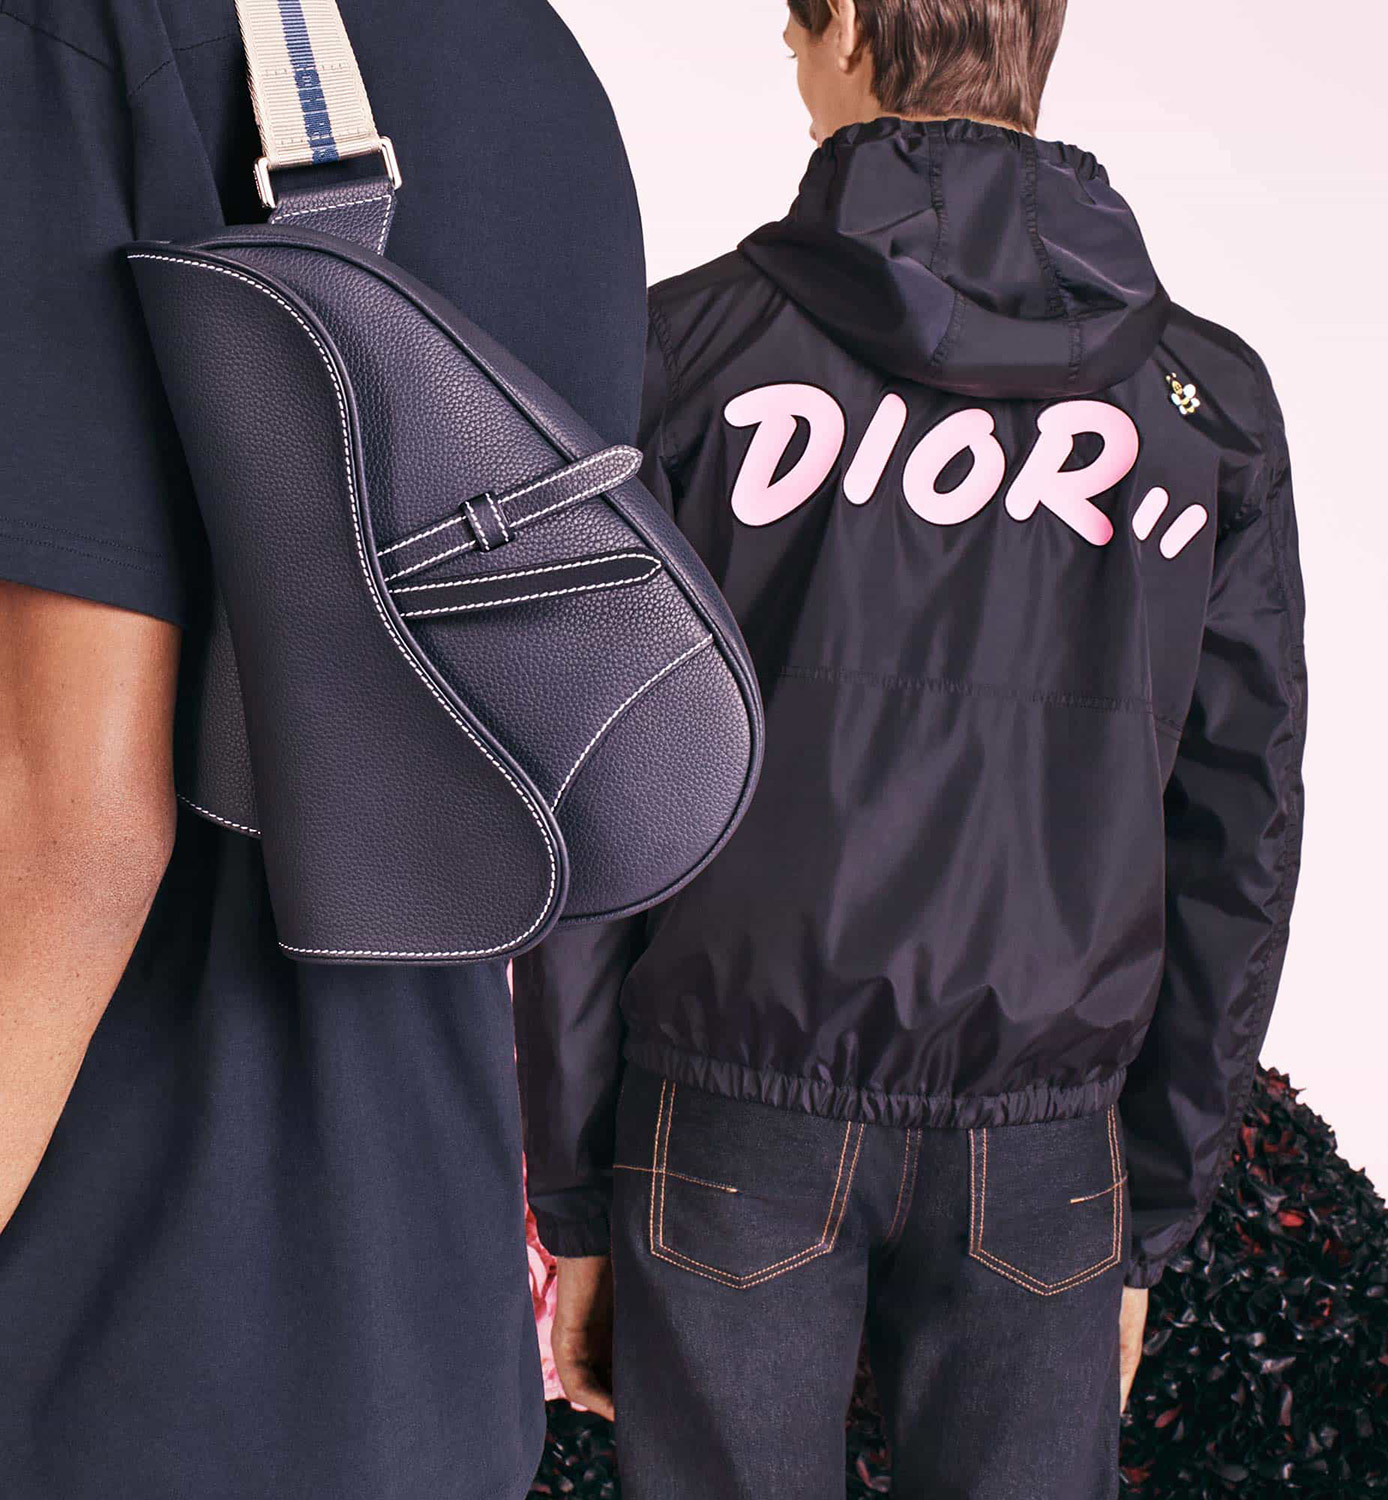 Dior x KAWS SS19 Collection: Release Date, Price & More Info